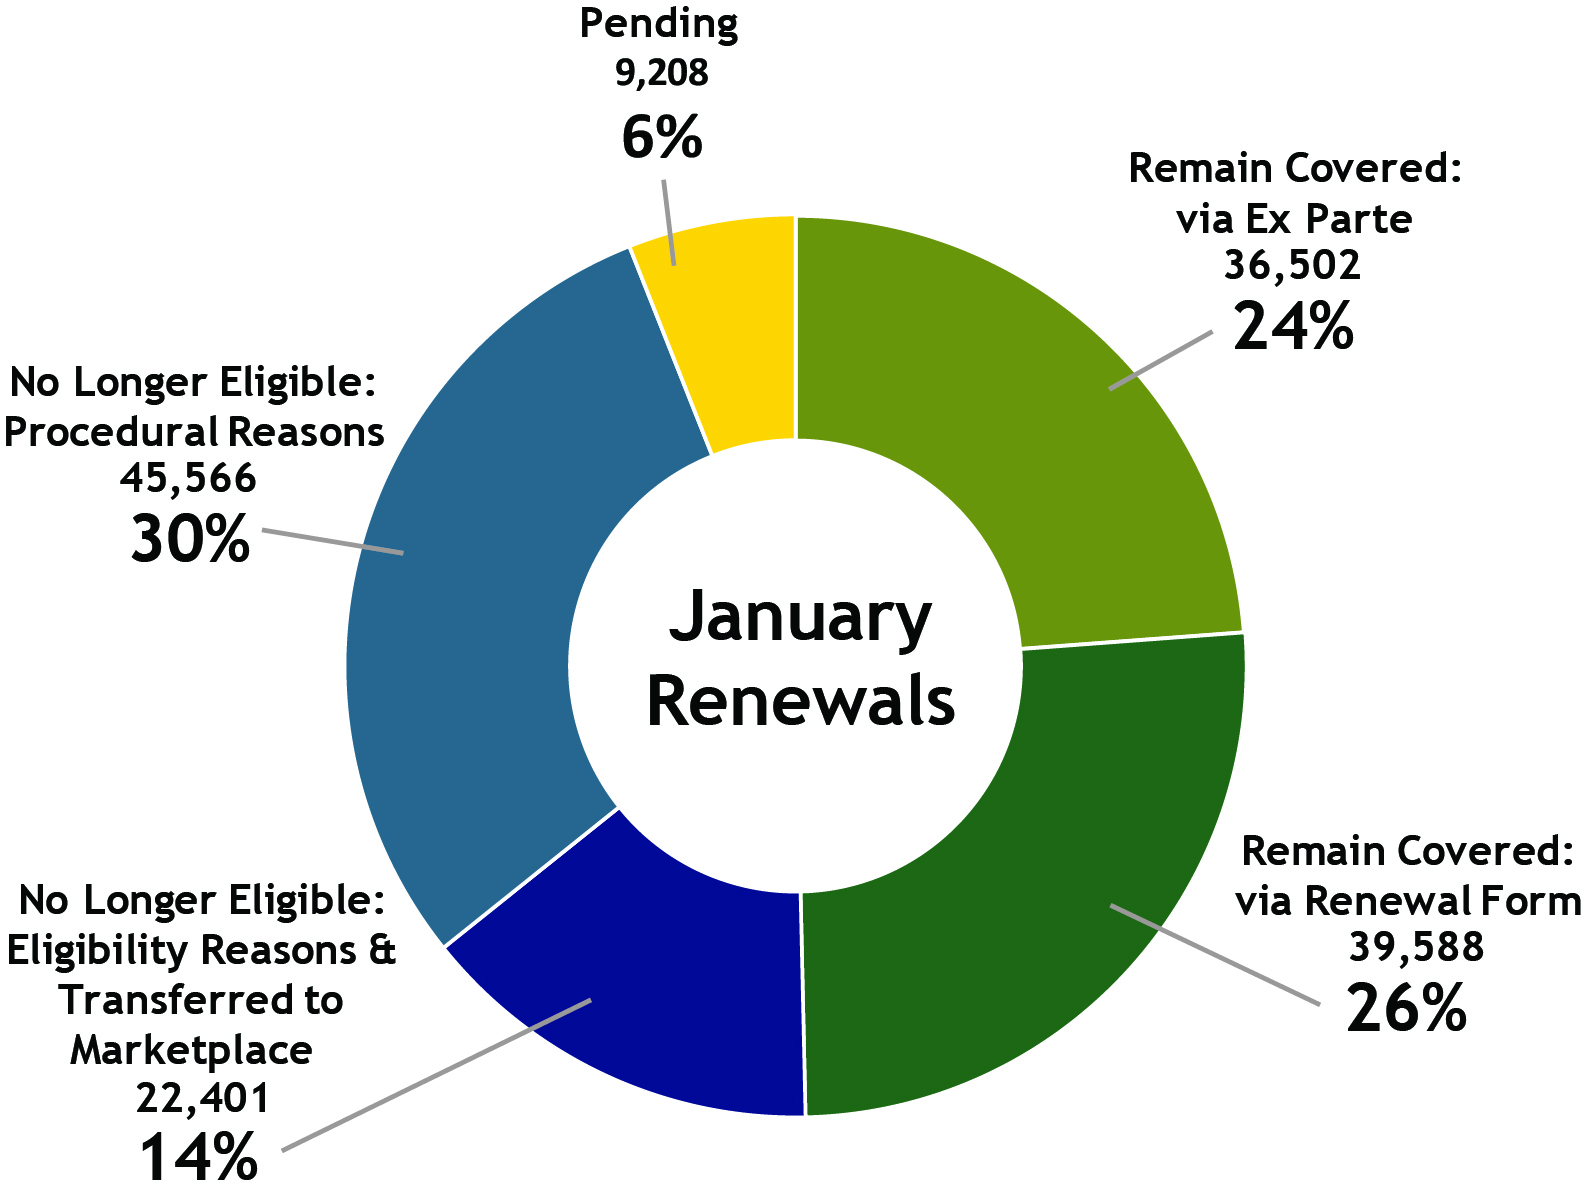 Donut chart displaying January 2024 renewals with those remaining covered via ex parte 36,502 at 24%, remain covered via renewal form 39,588 at 26%, no longer eligible and transferred to marketplace 22,401 at 14%, no longer eligible for procedural reasons 45,566 at 30% and pending 9,208 at 9%.